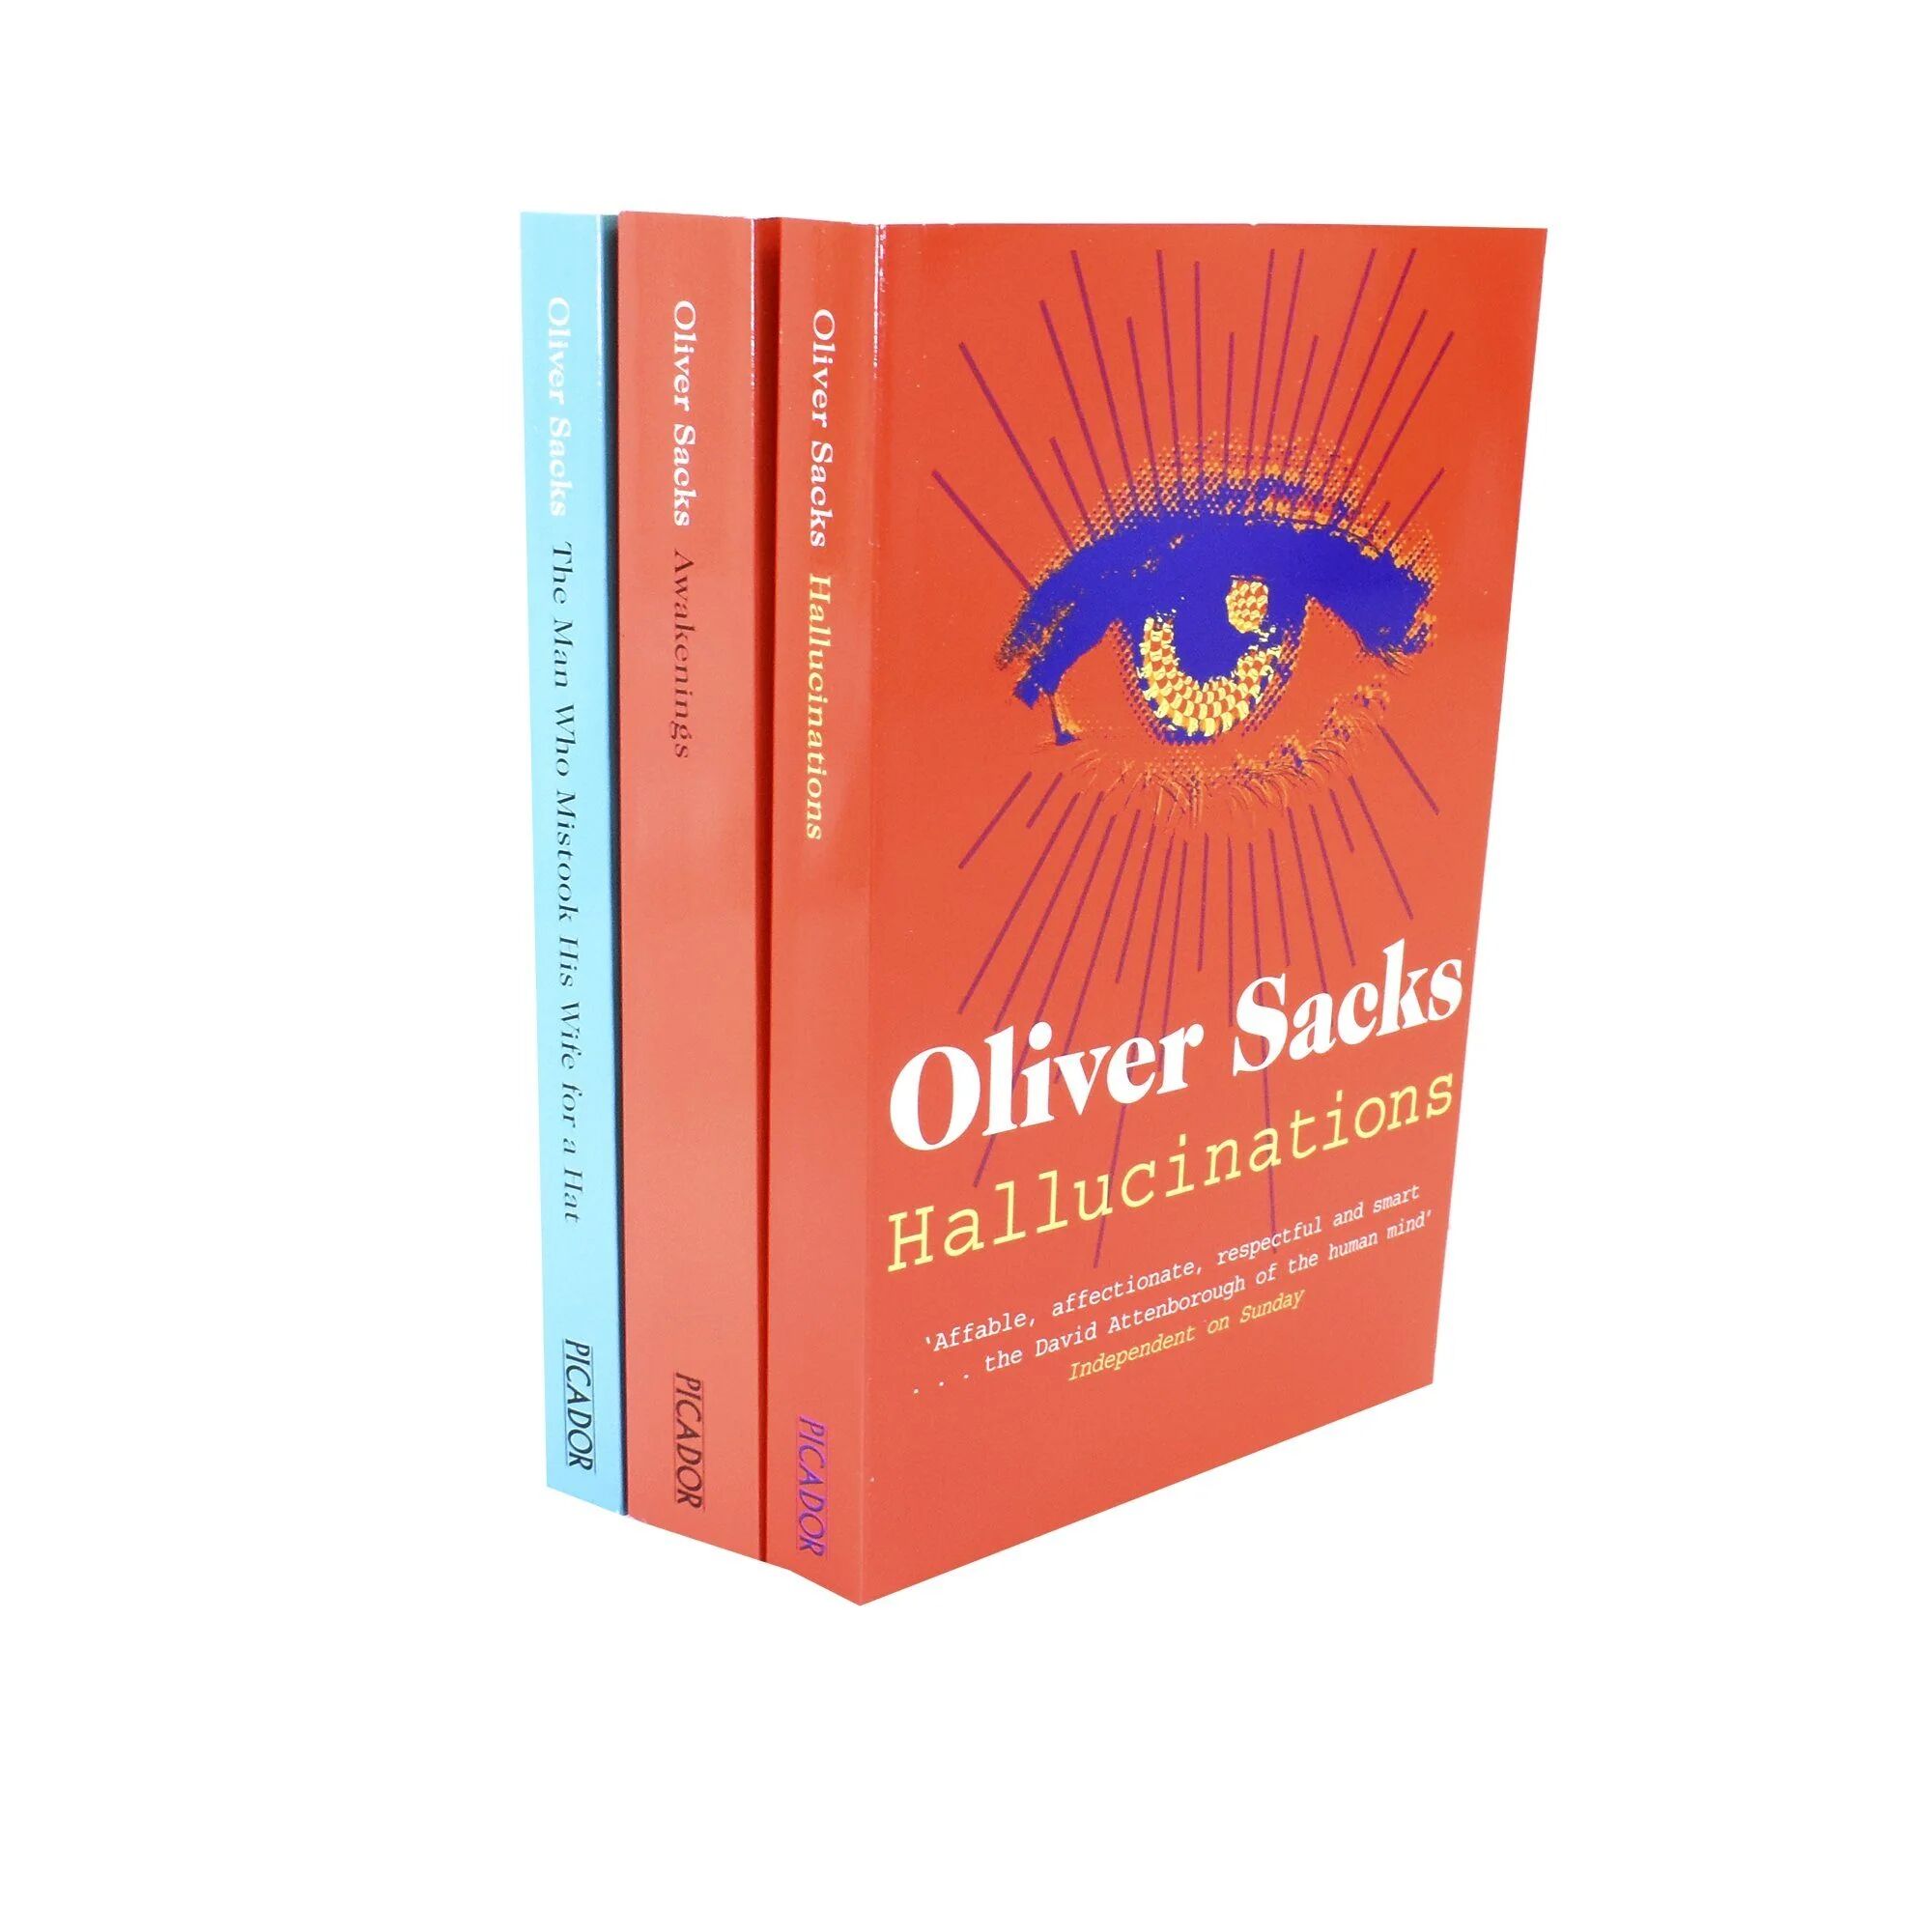 Oliver Sacks 3 Books Collection Set (The Man Who Mistook His Wife for a Hat, Hallucinations, Awakenings) - Non-Fiction - Paperback Picador